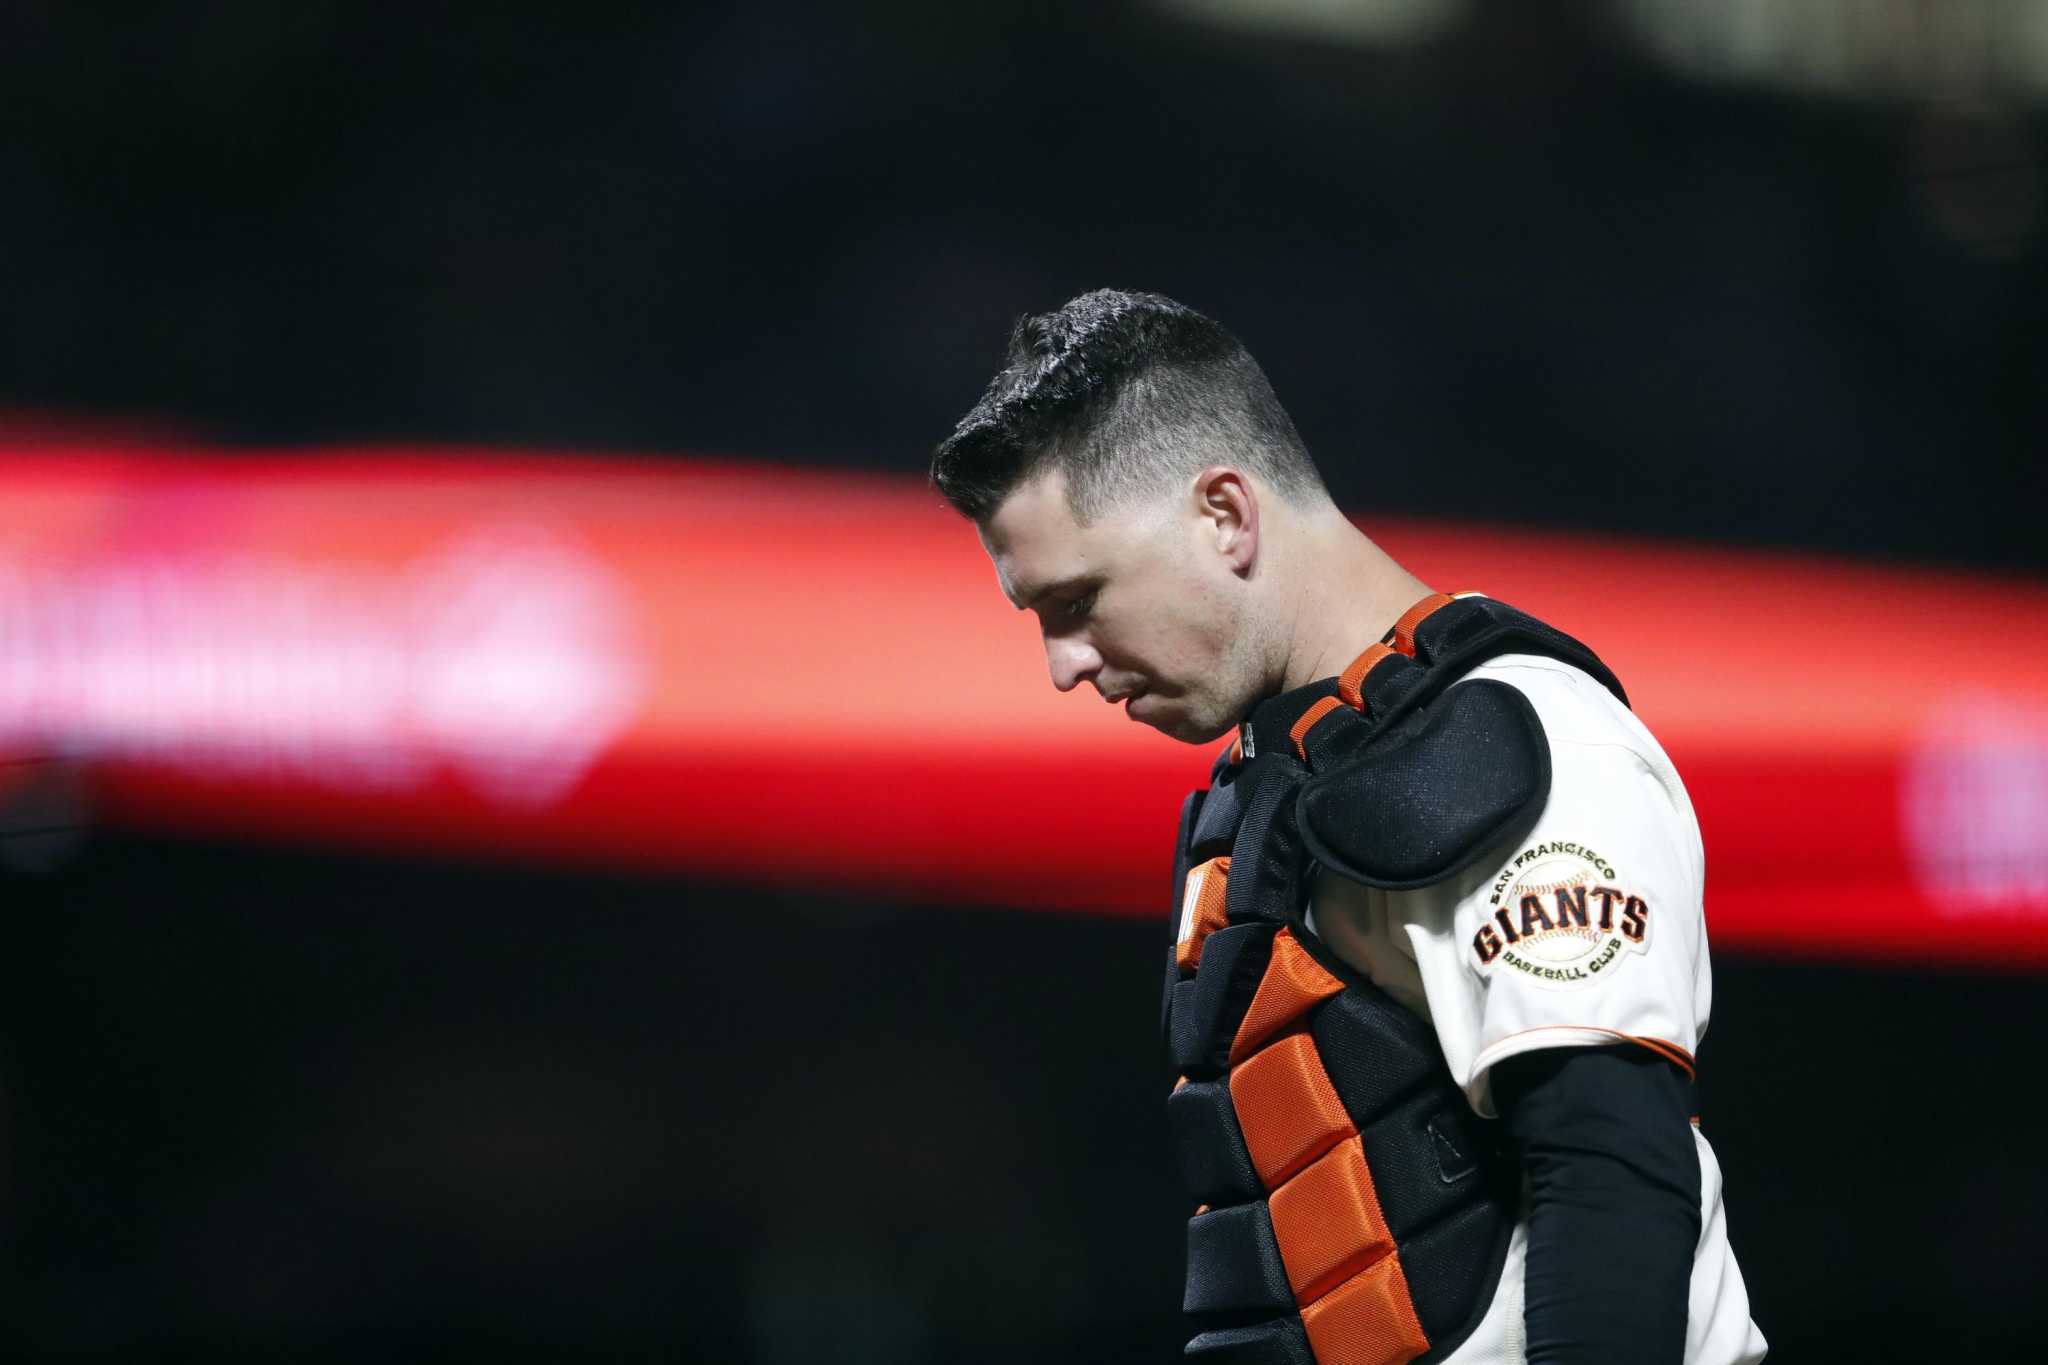 Is Buster Posey really a lock for the Hall of Fame? It's not that